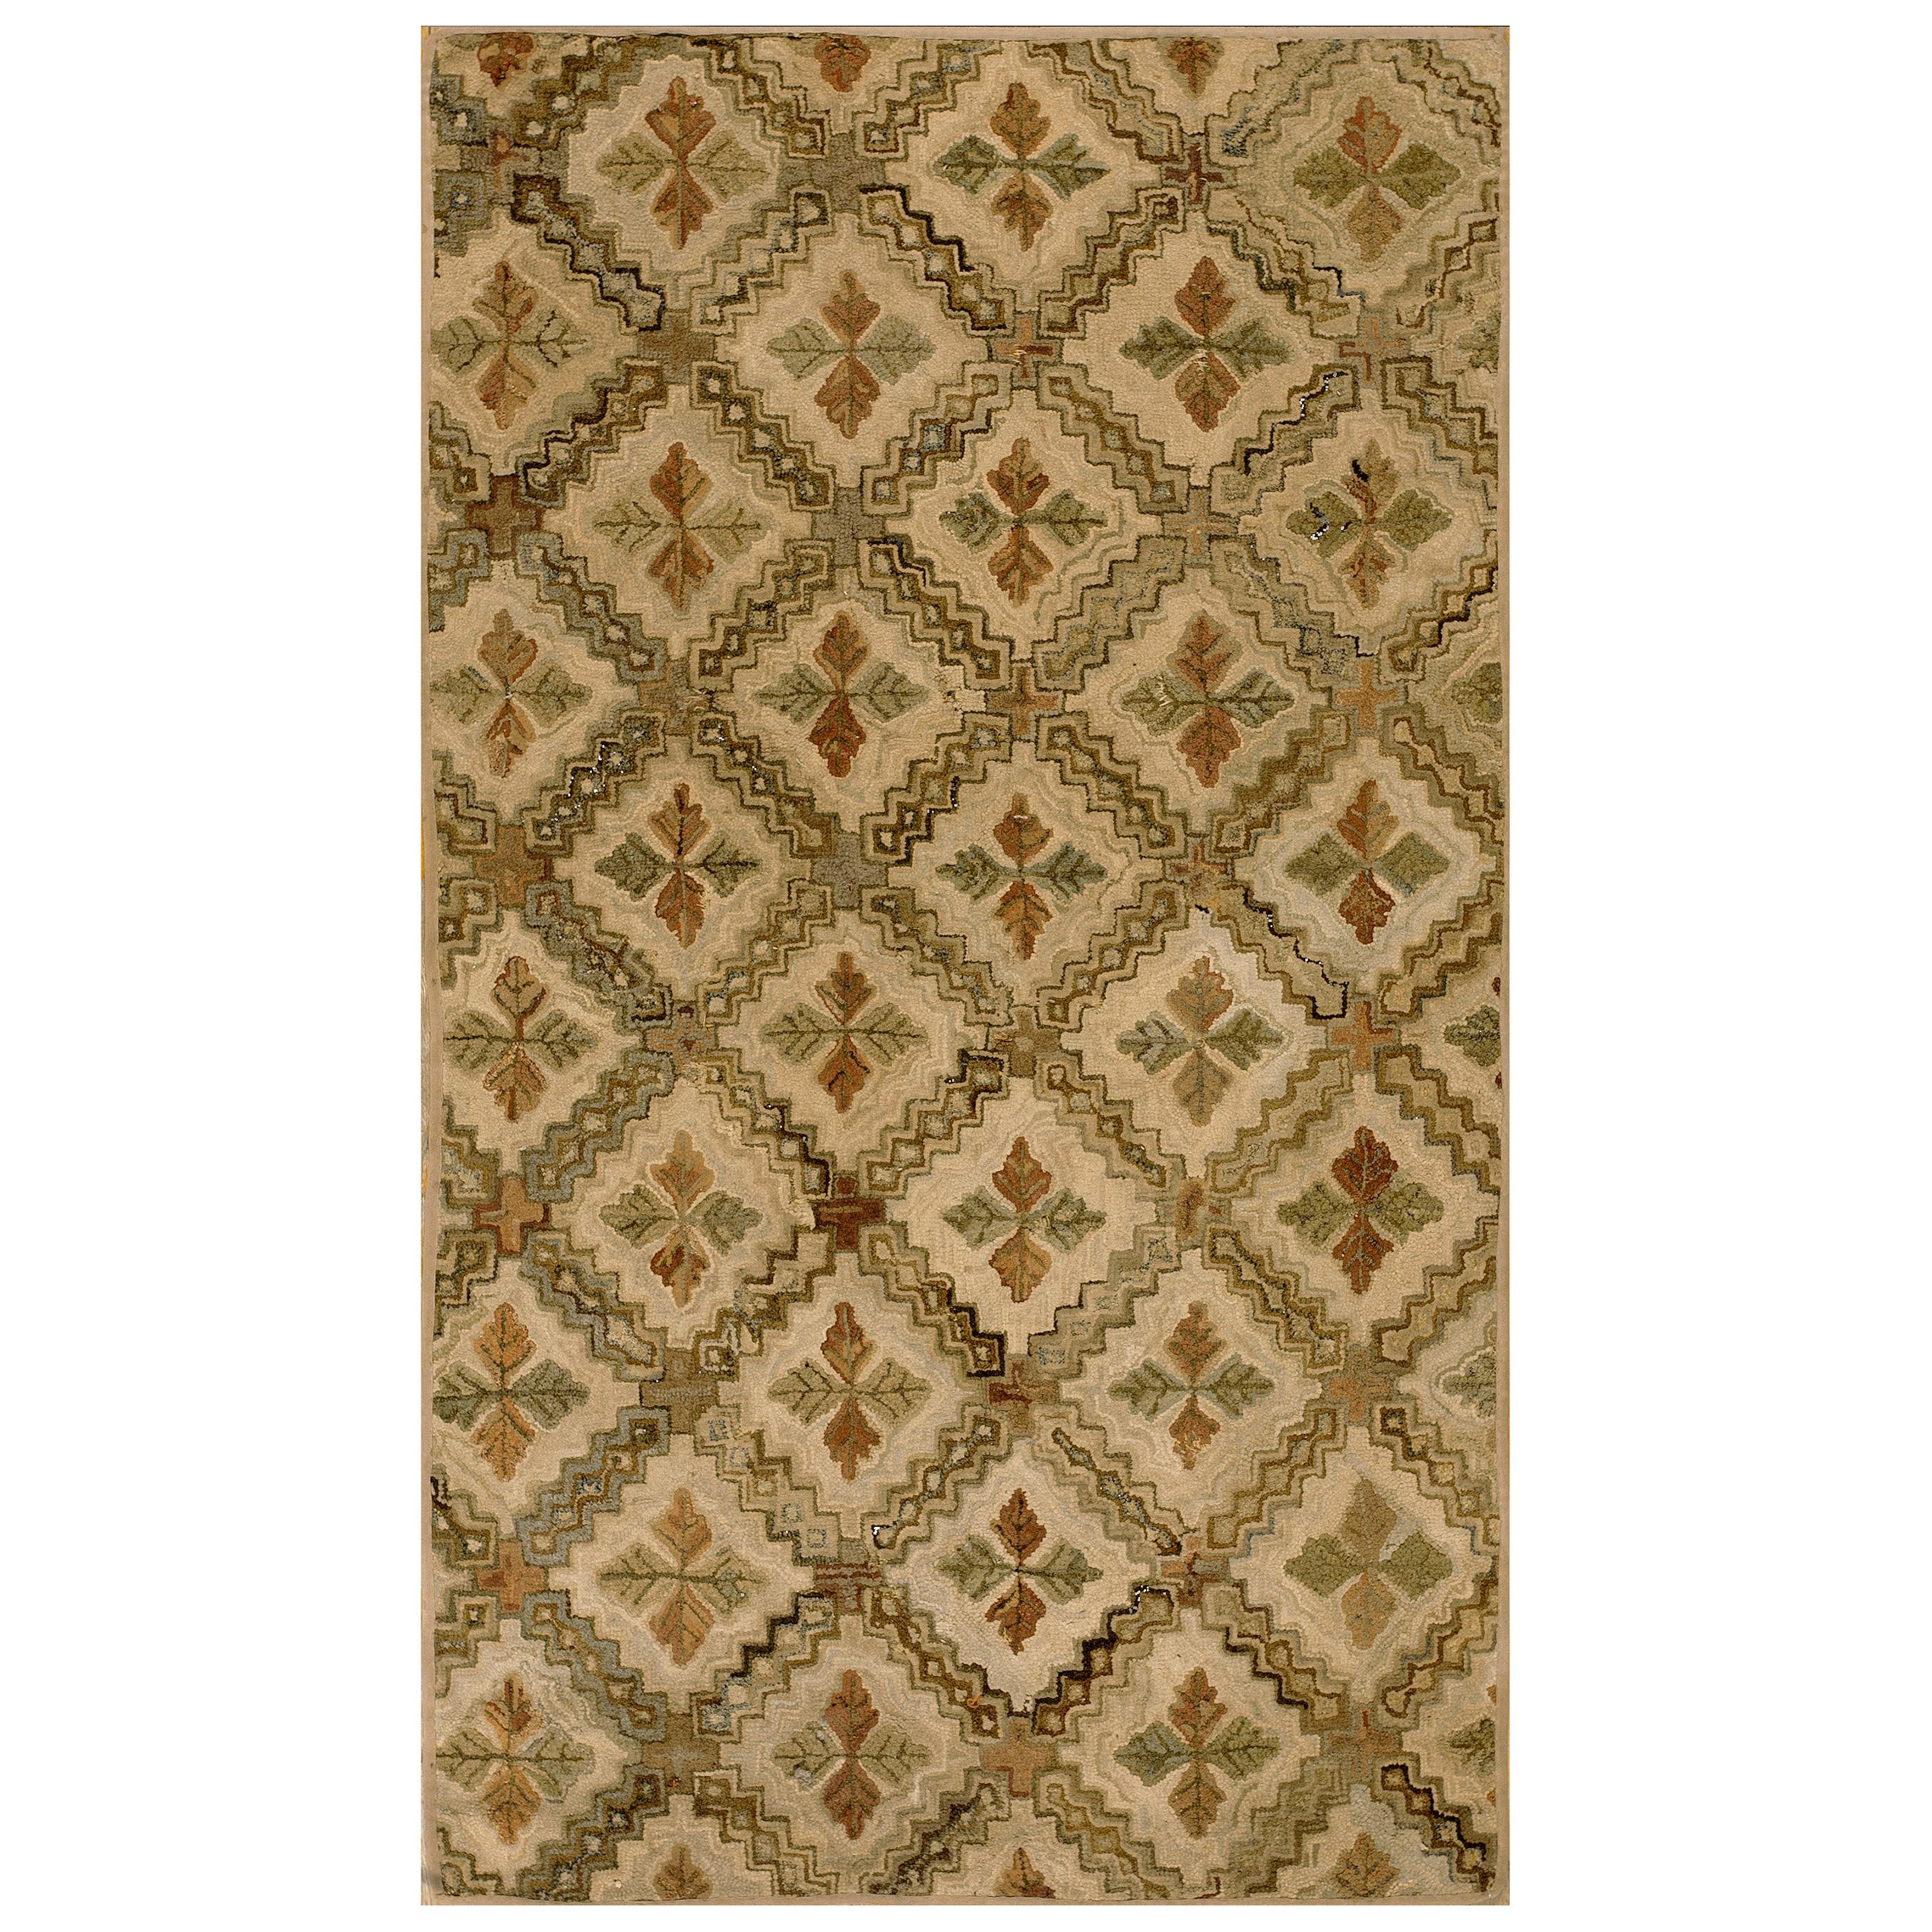 Antique American Hooked Rug Rugs For Sale